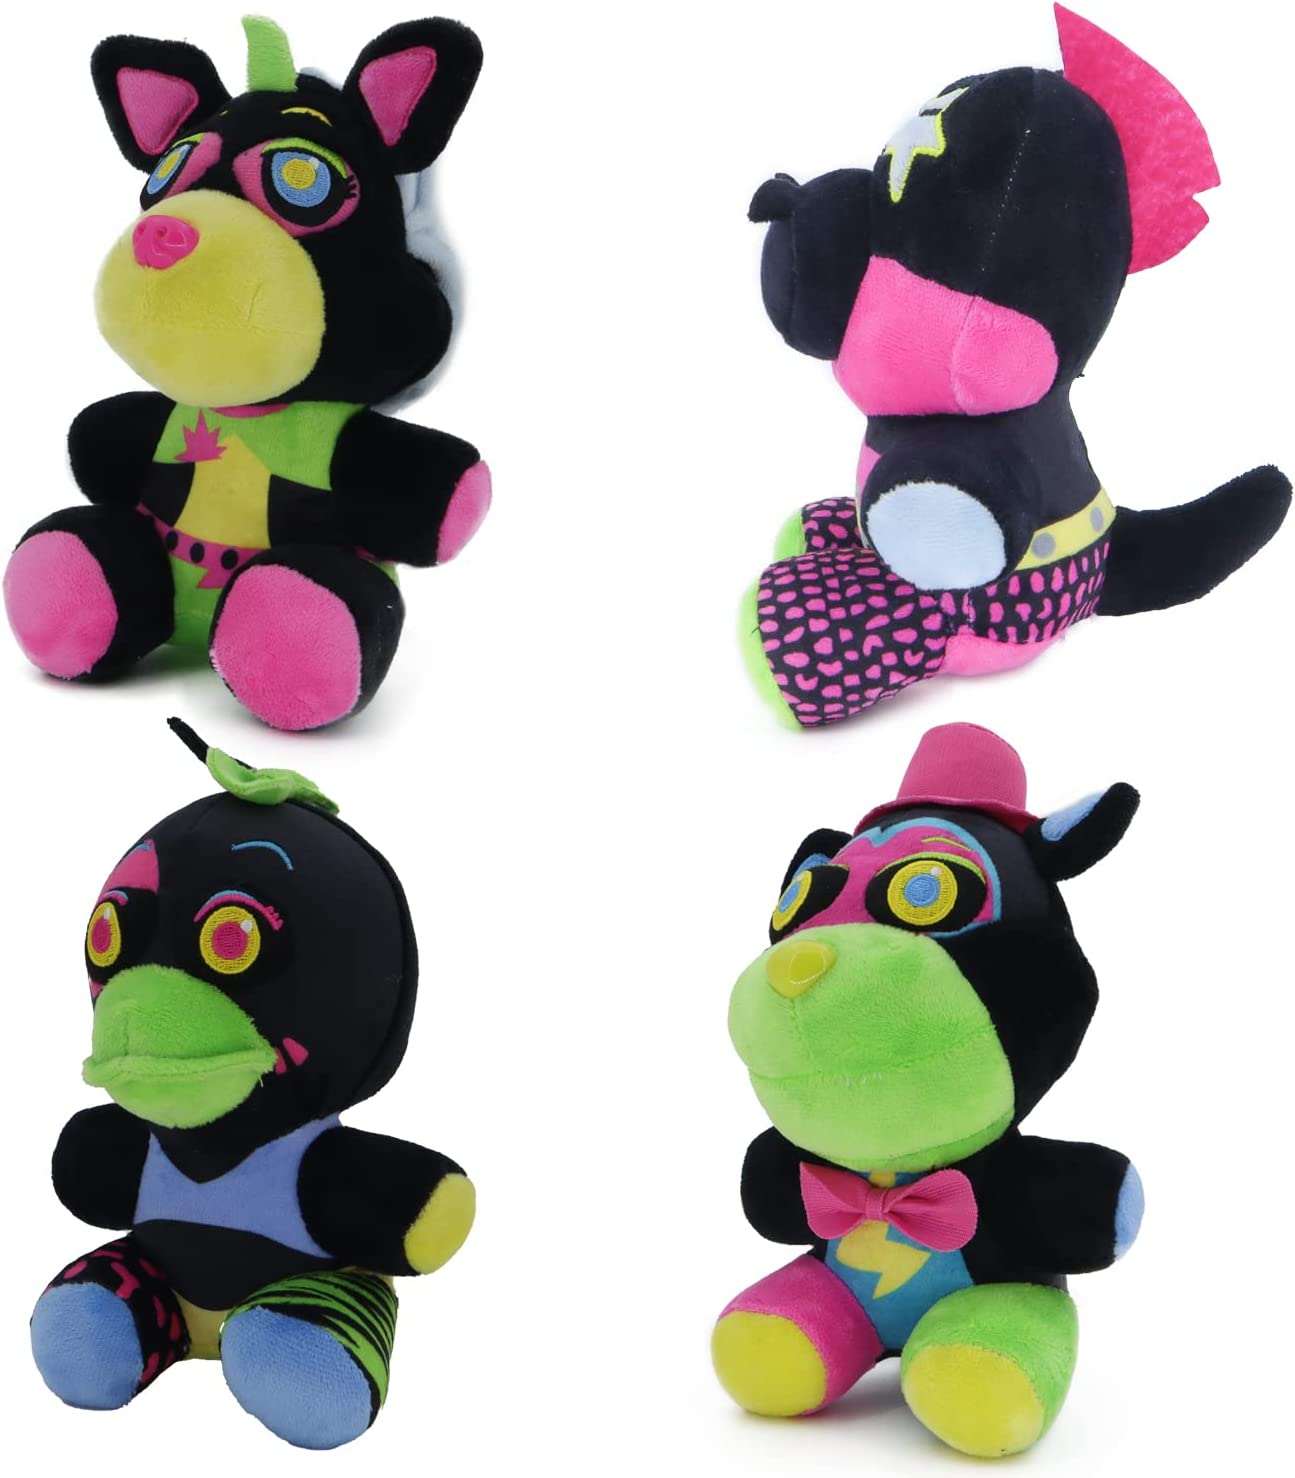 FNAF Plush toy Five Nights at Freddy's Security Breach Plushies